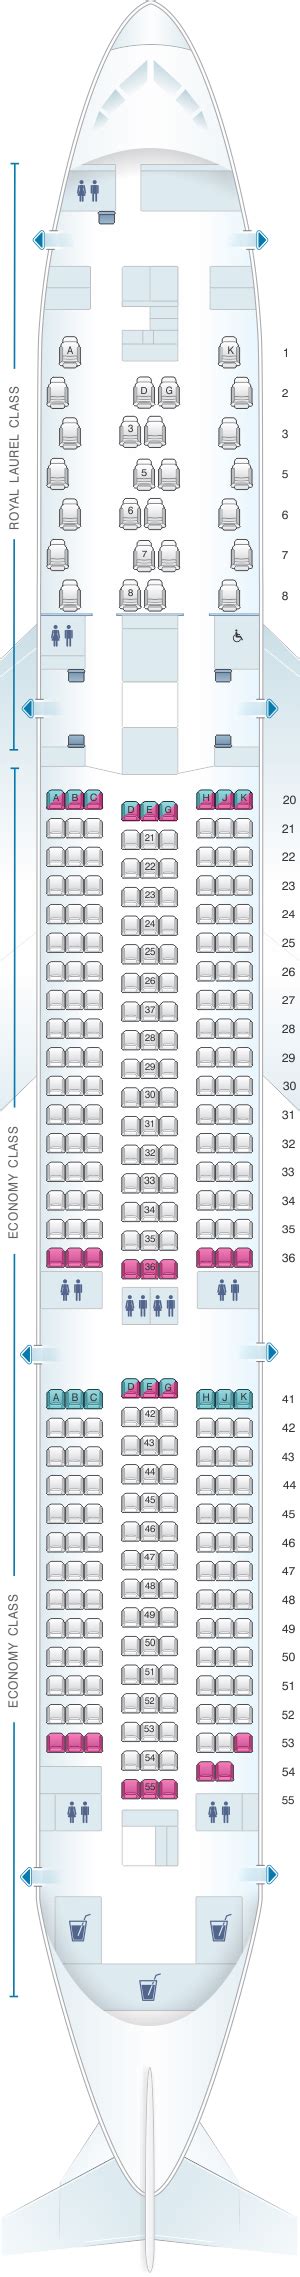 Seat Map And Seating Chart Eva Air Boeing Er Pax Boeing